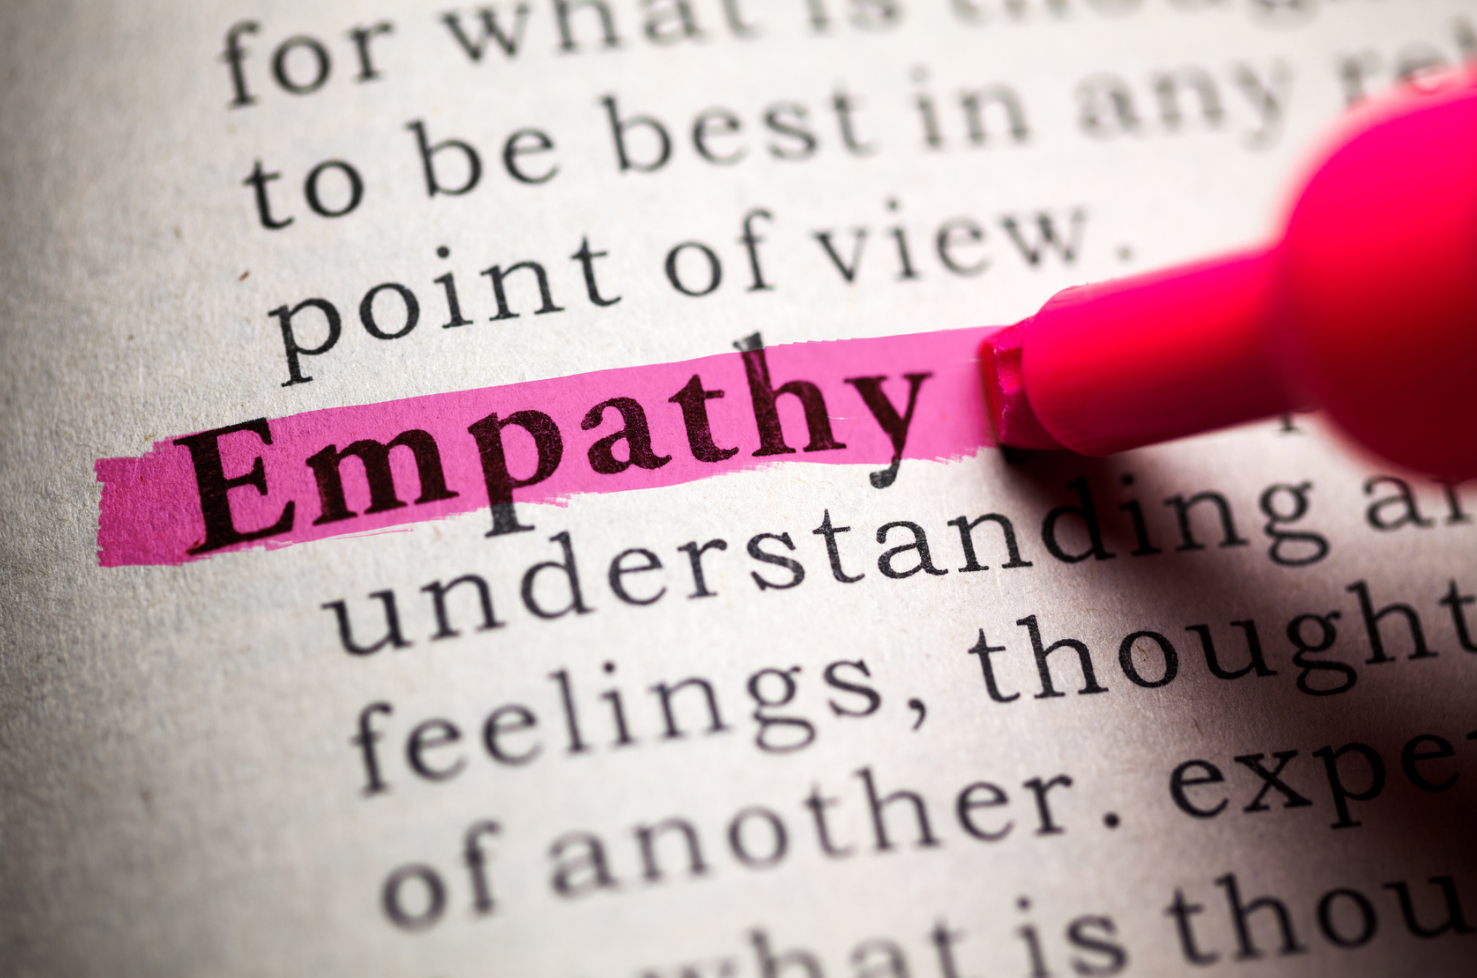 persuade with empathy